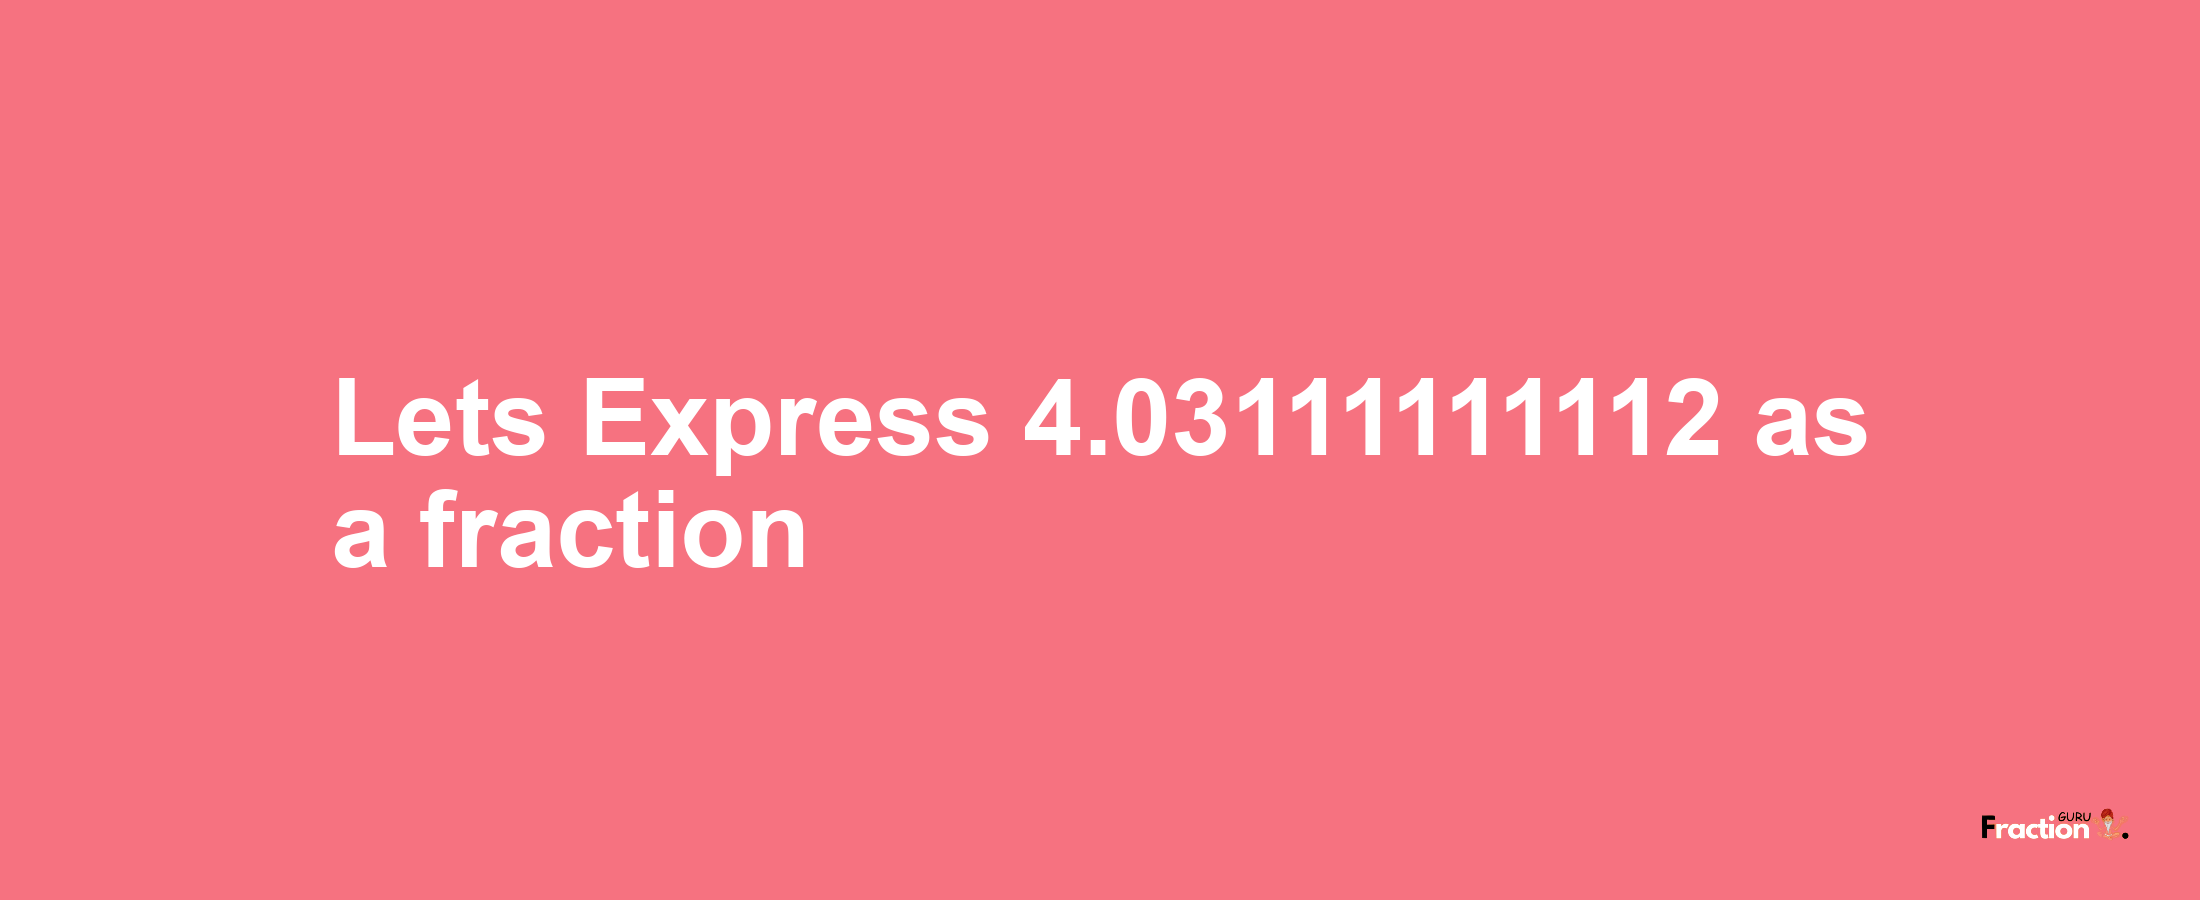 Lets Express 4.03111111112 as afraction